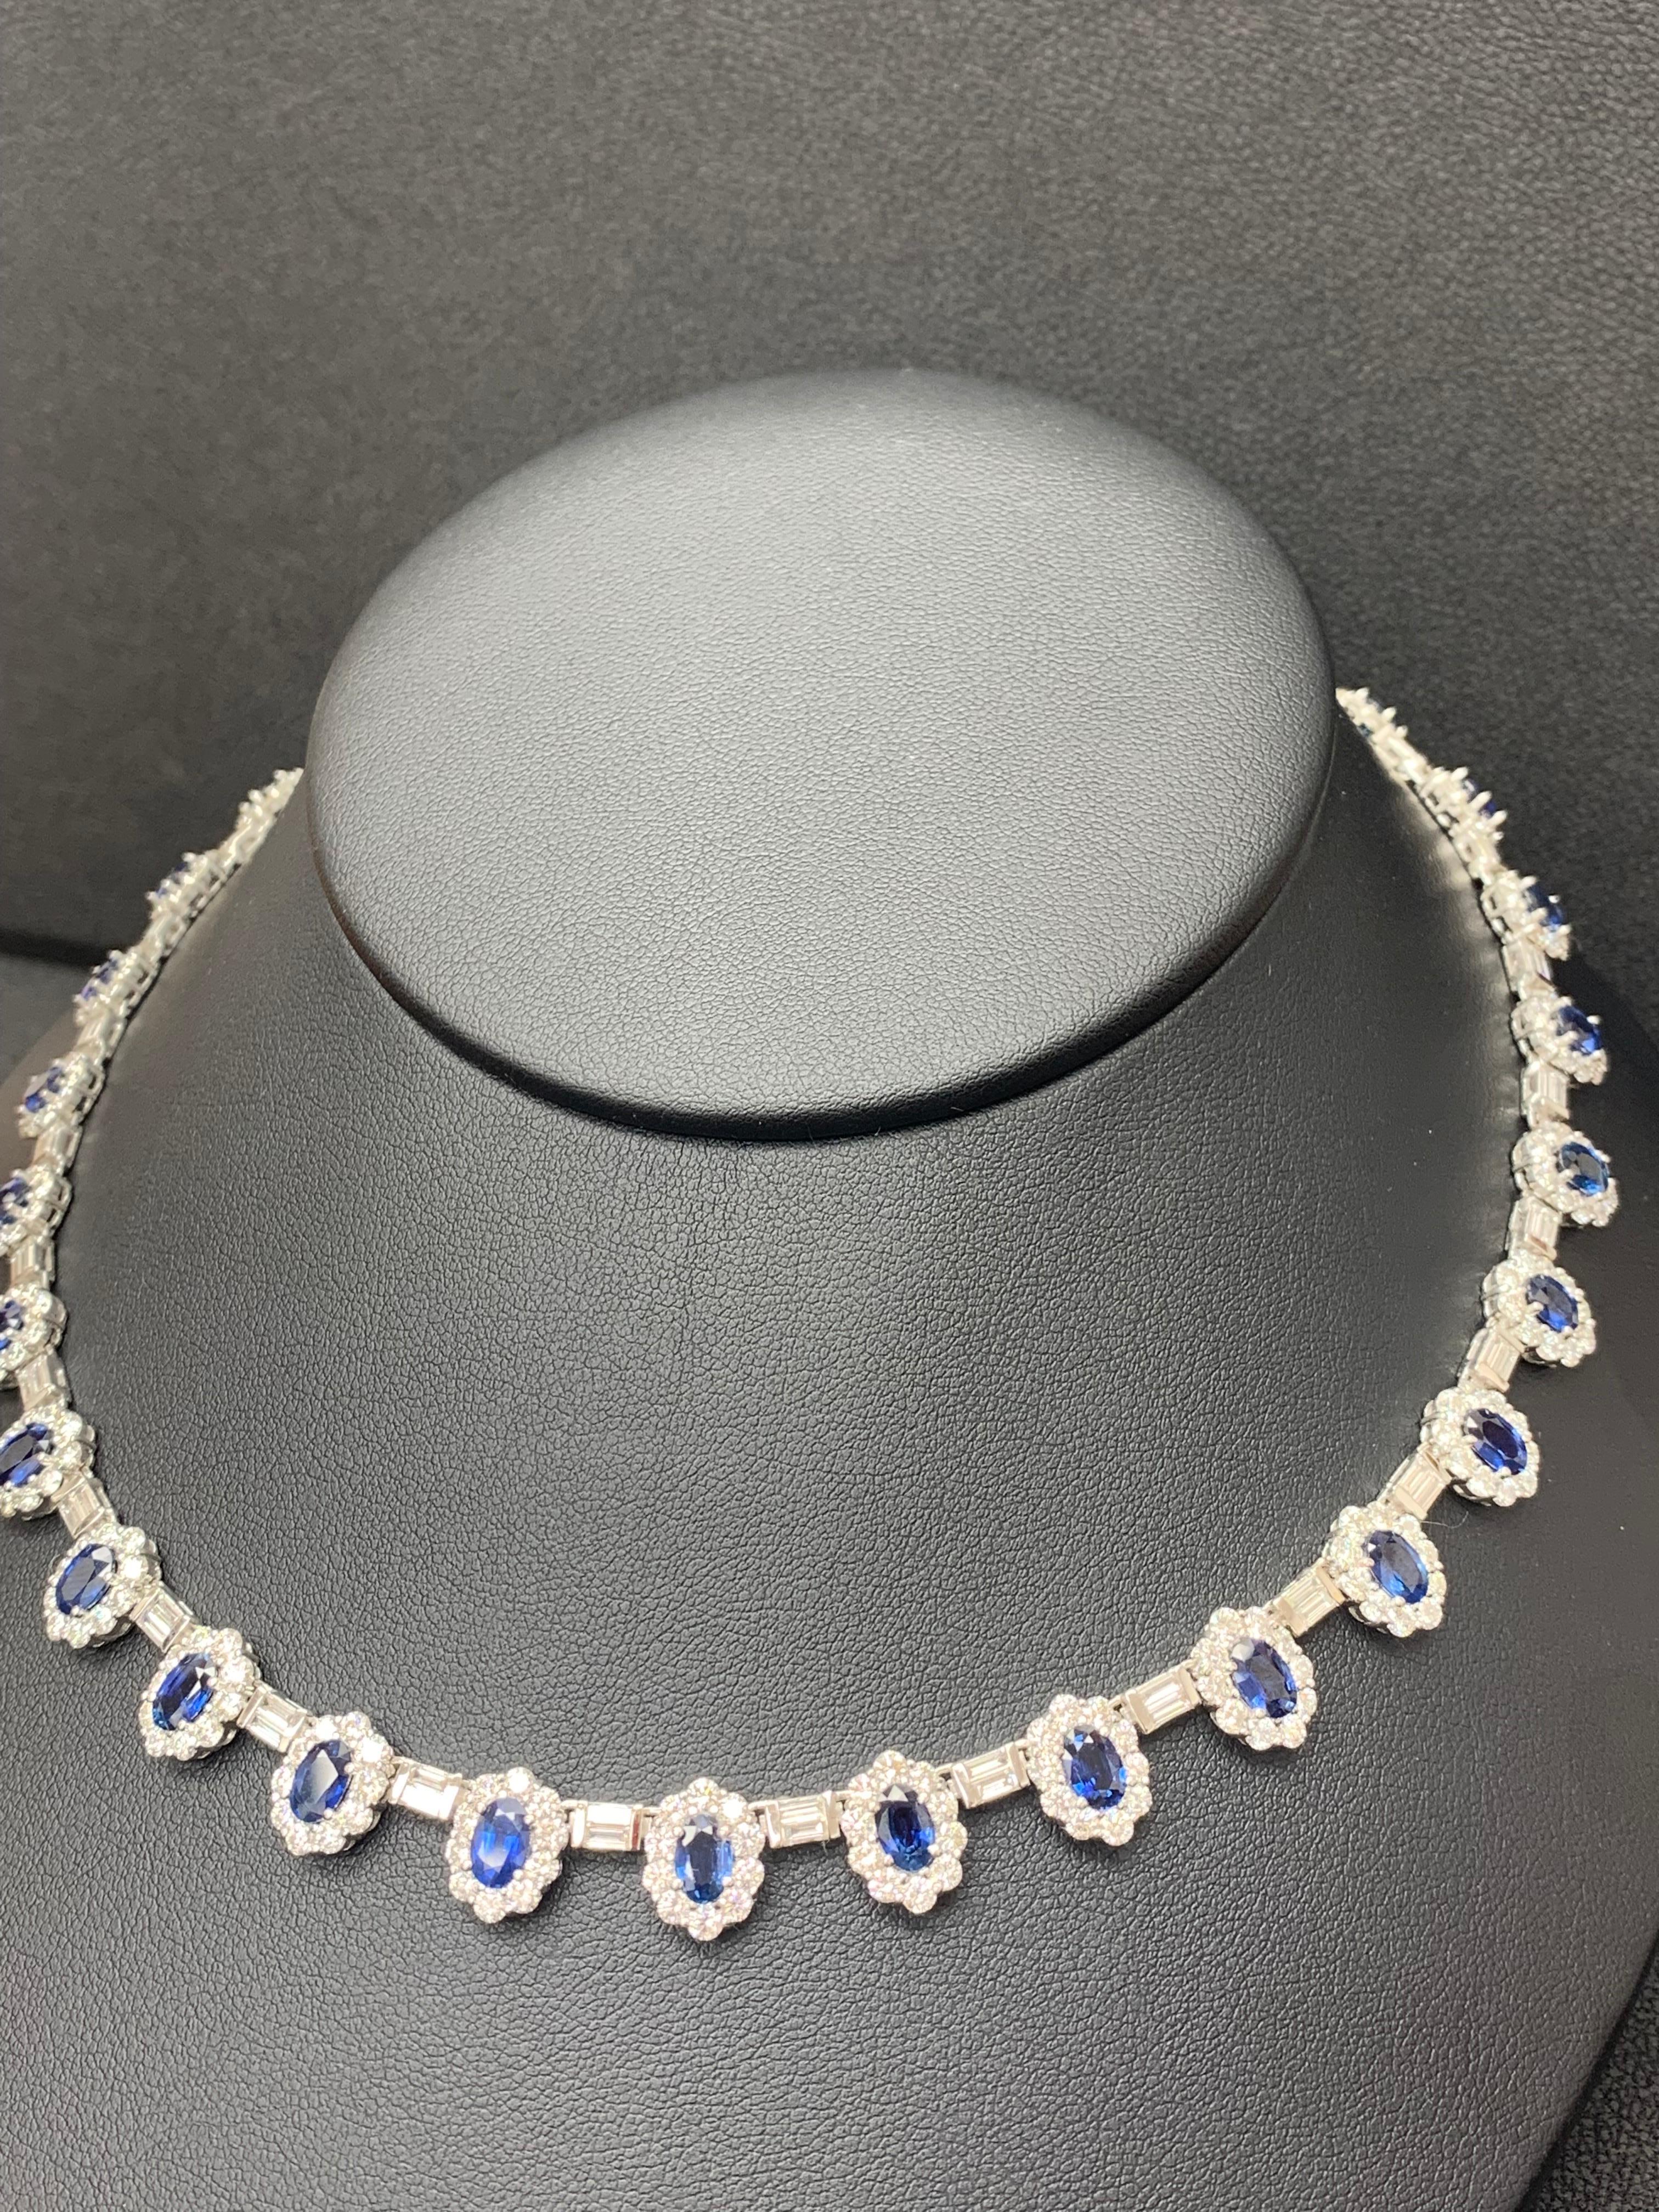 blue and white stone necklace